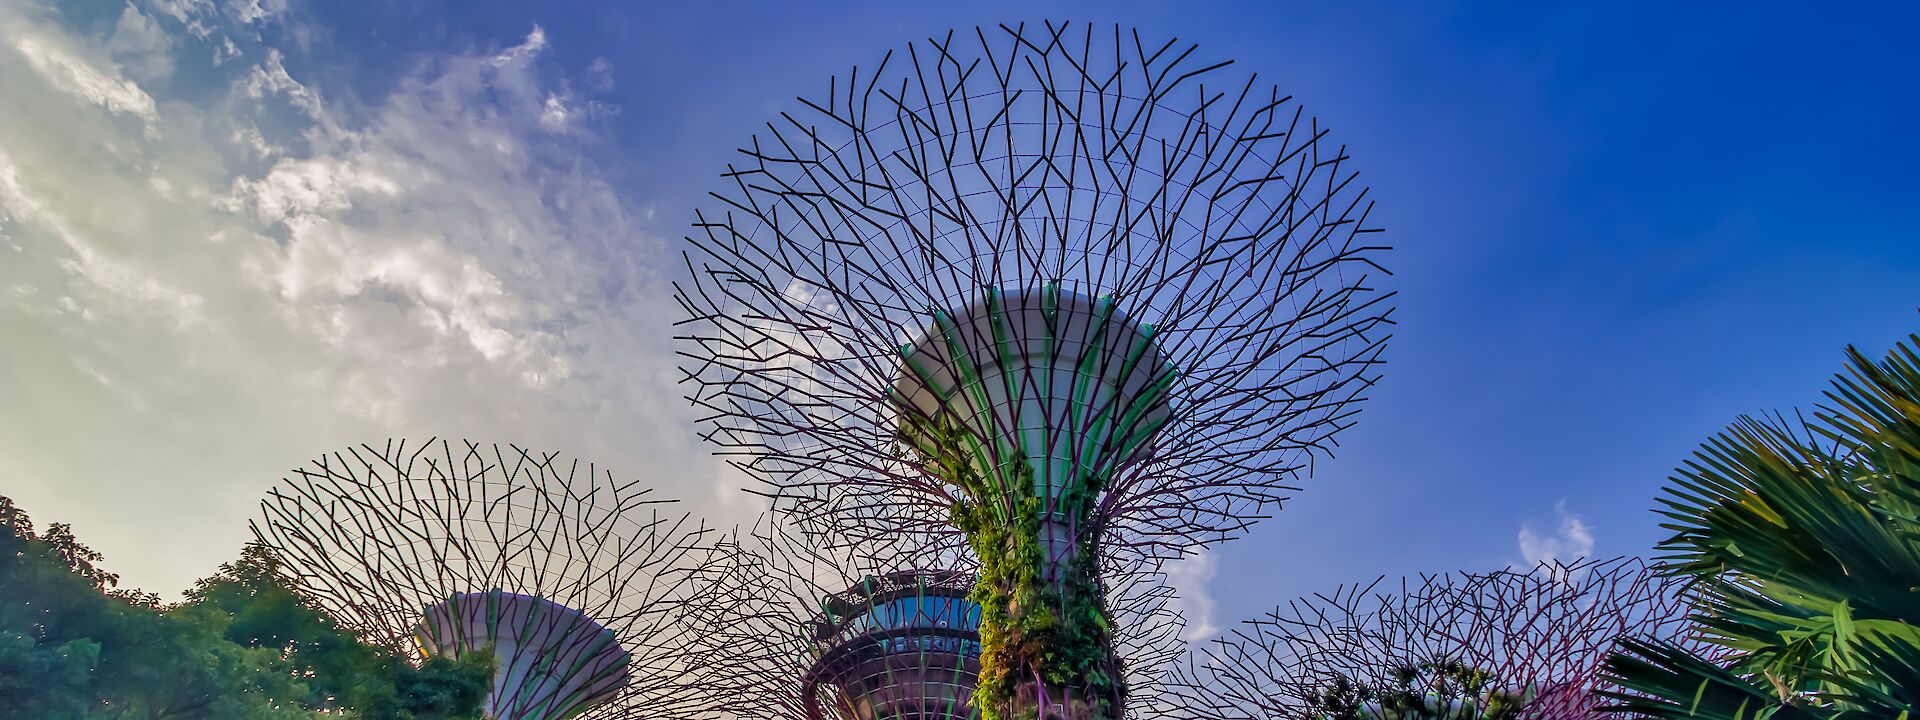 Gardens by the Bay, Singapore. Andreas M@Unsplash